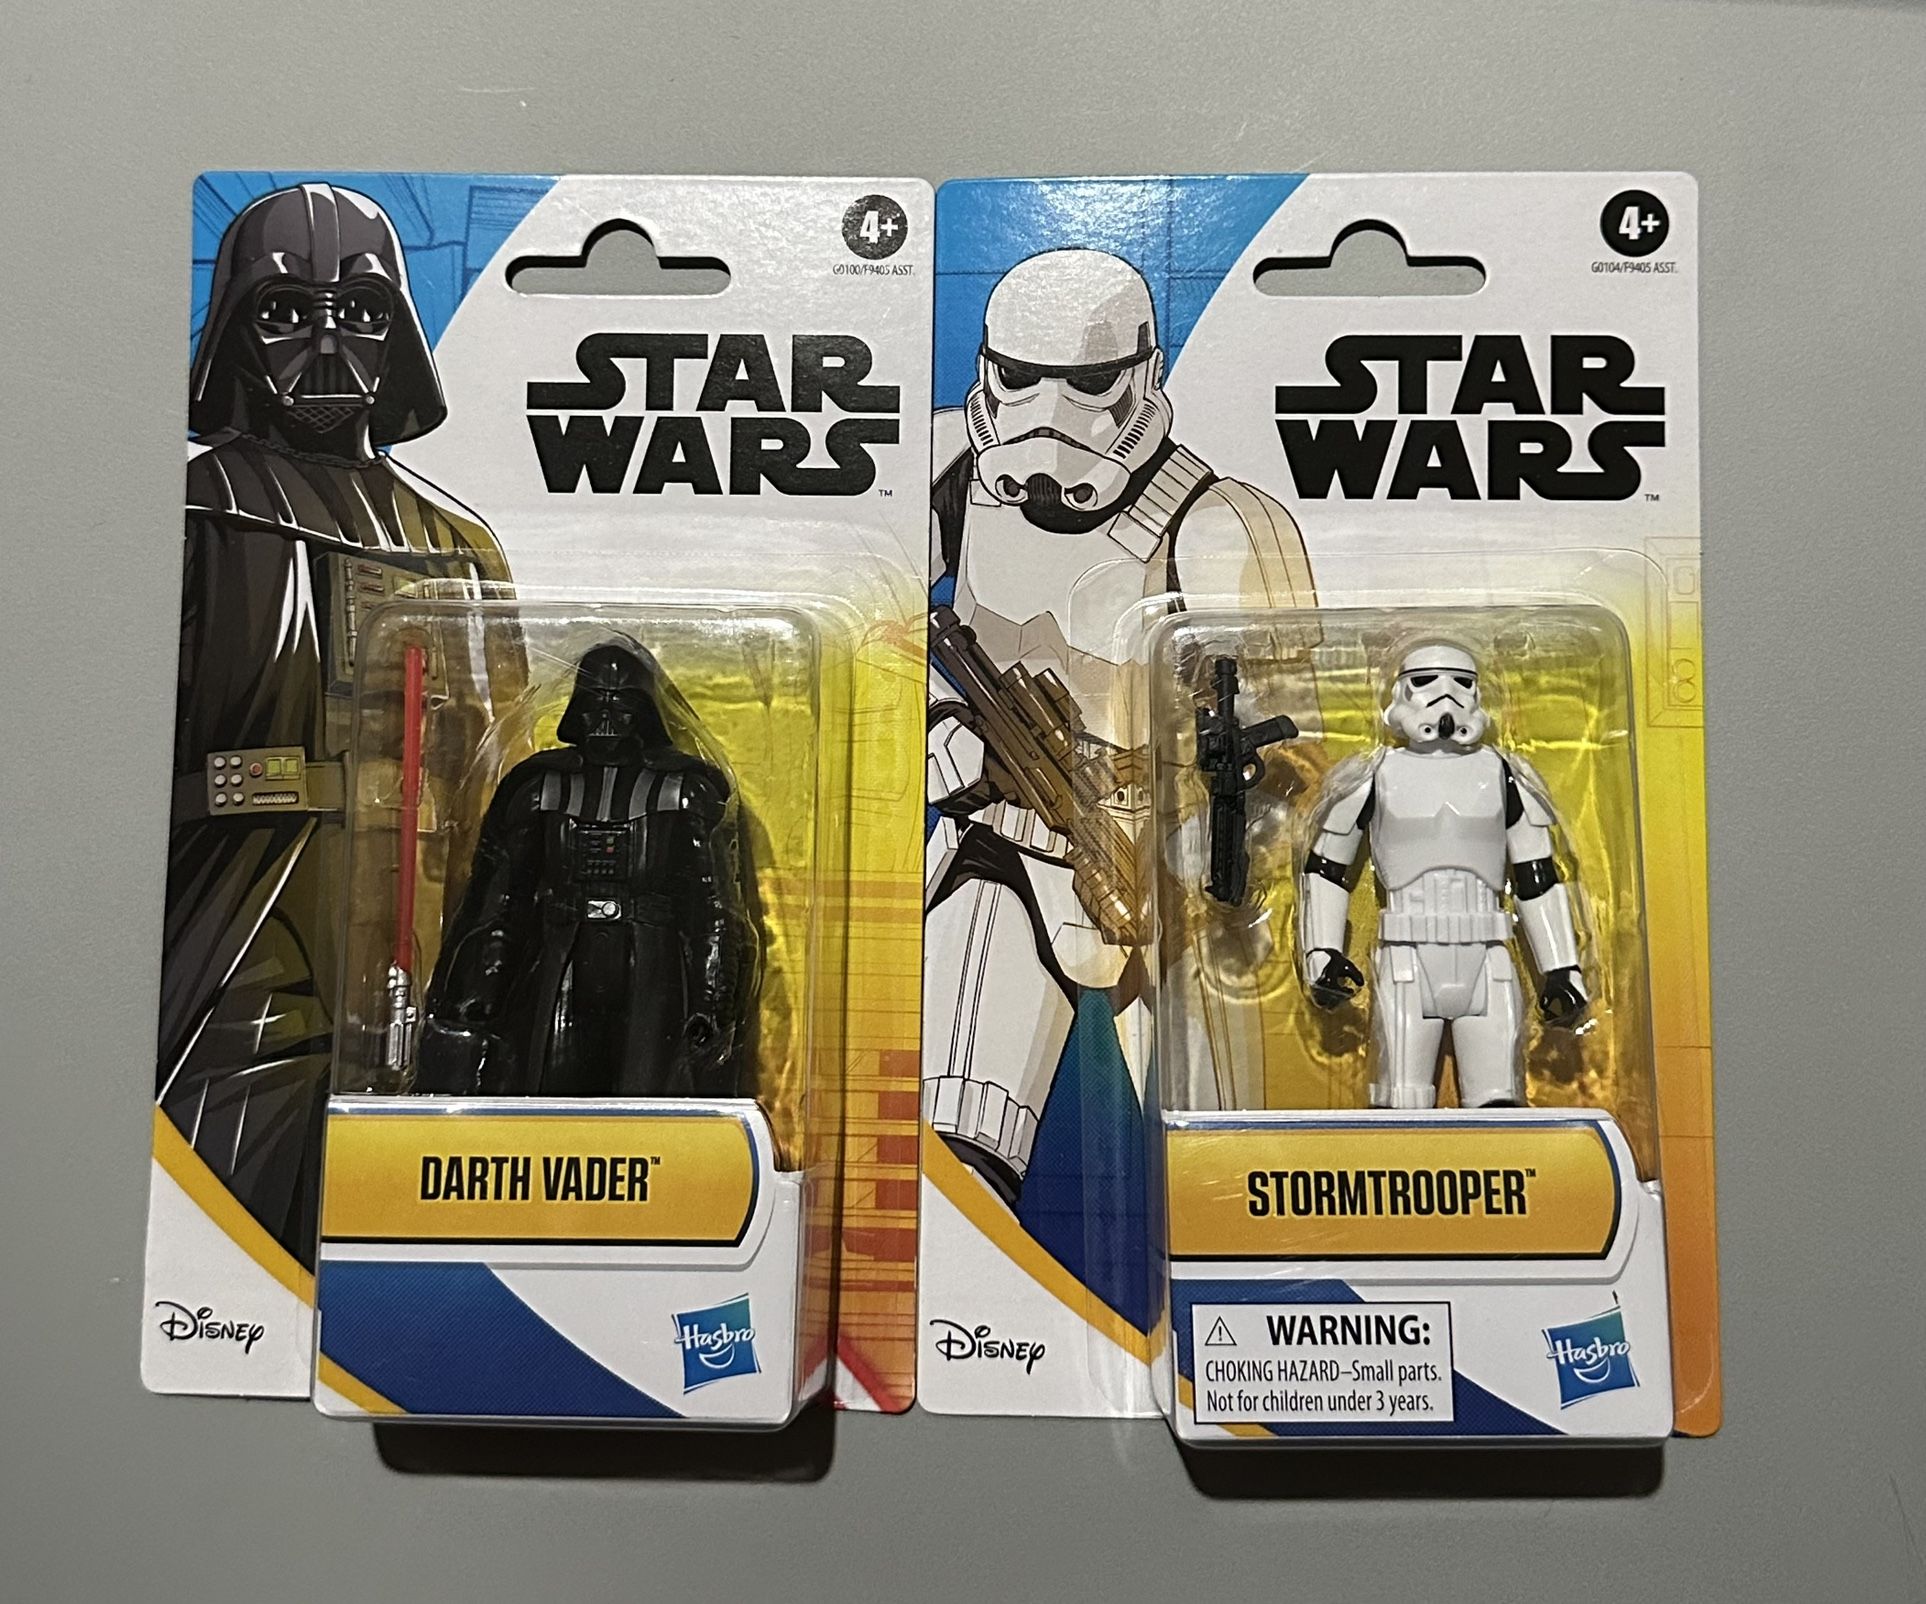 Star Wars Storm Trooper And Darth Vader Figure Toy $12